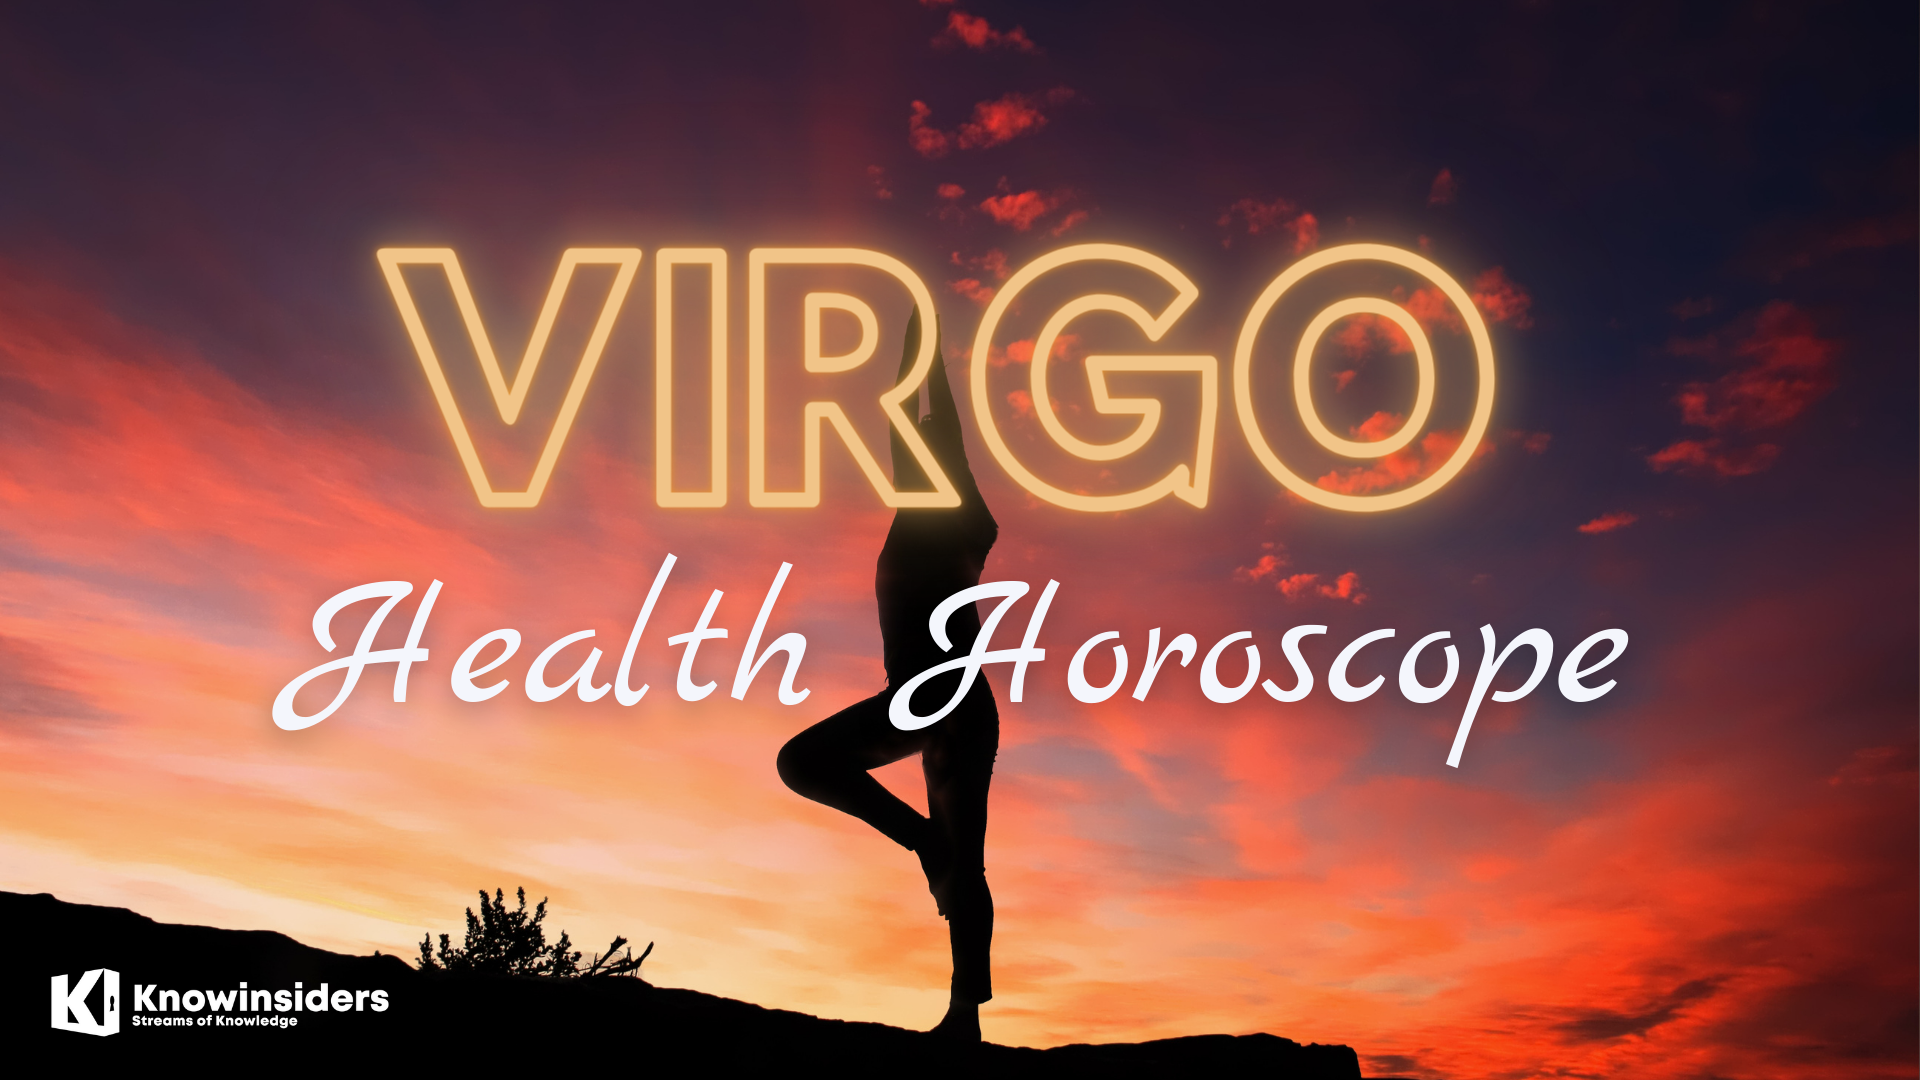 VIRGO Horoscope: Characteristics, Astrological Predictions and Compatibility